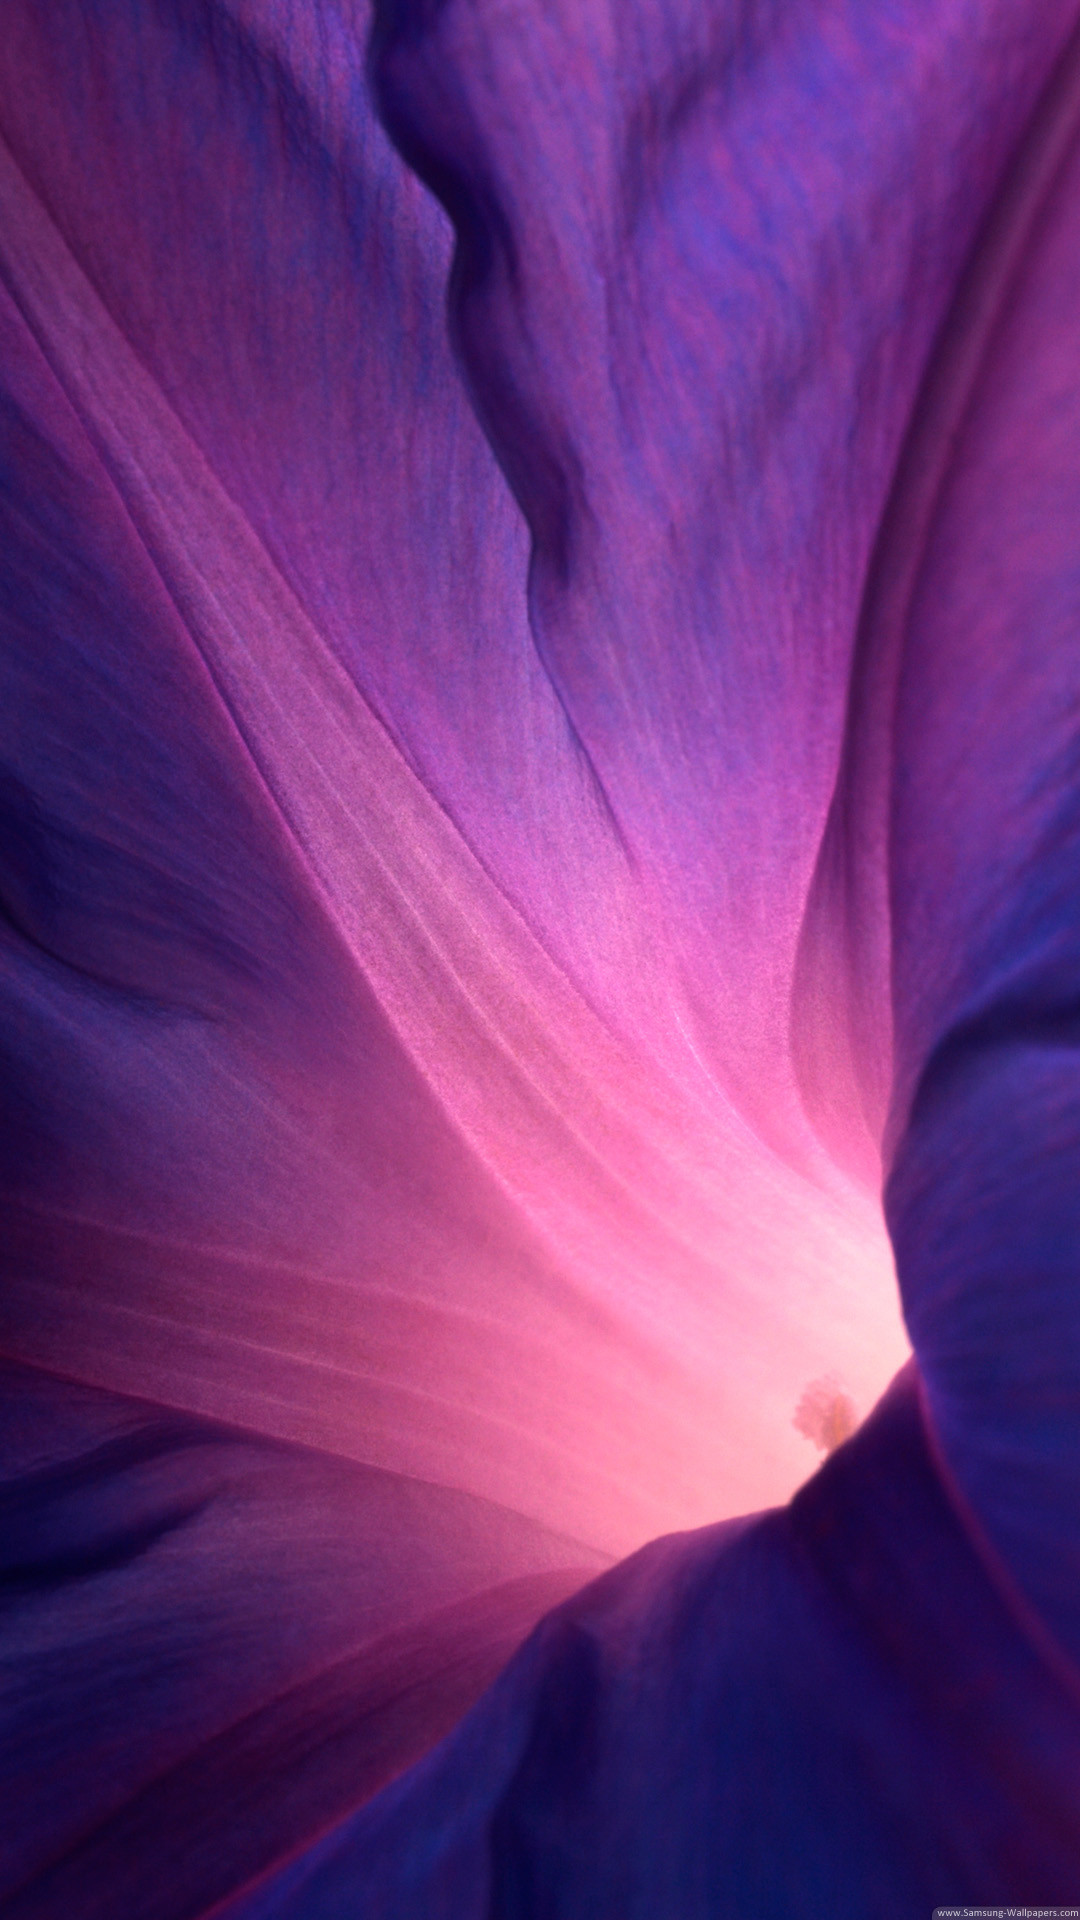 1080x1920 Download Sony Xperia Z1 Official Stock Flower Lock Screen iPhone 6 Plus HD  Wallpaper